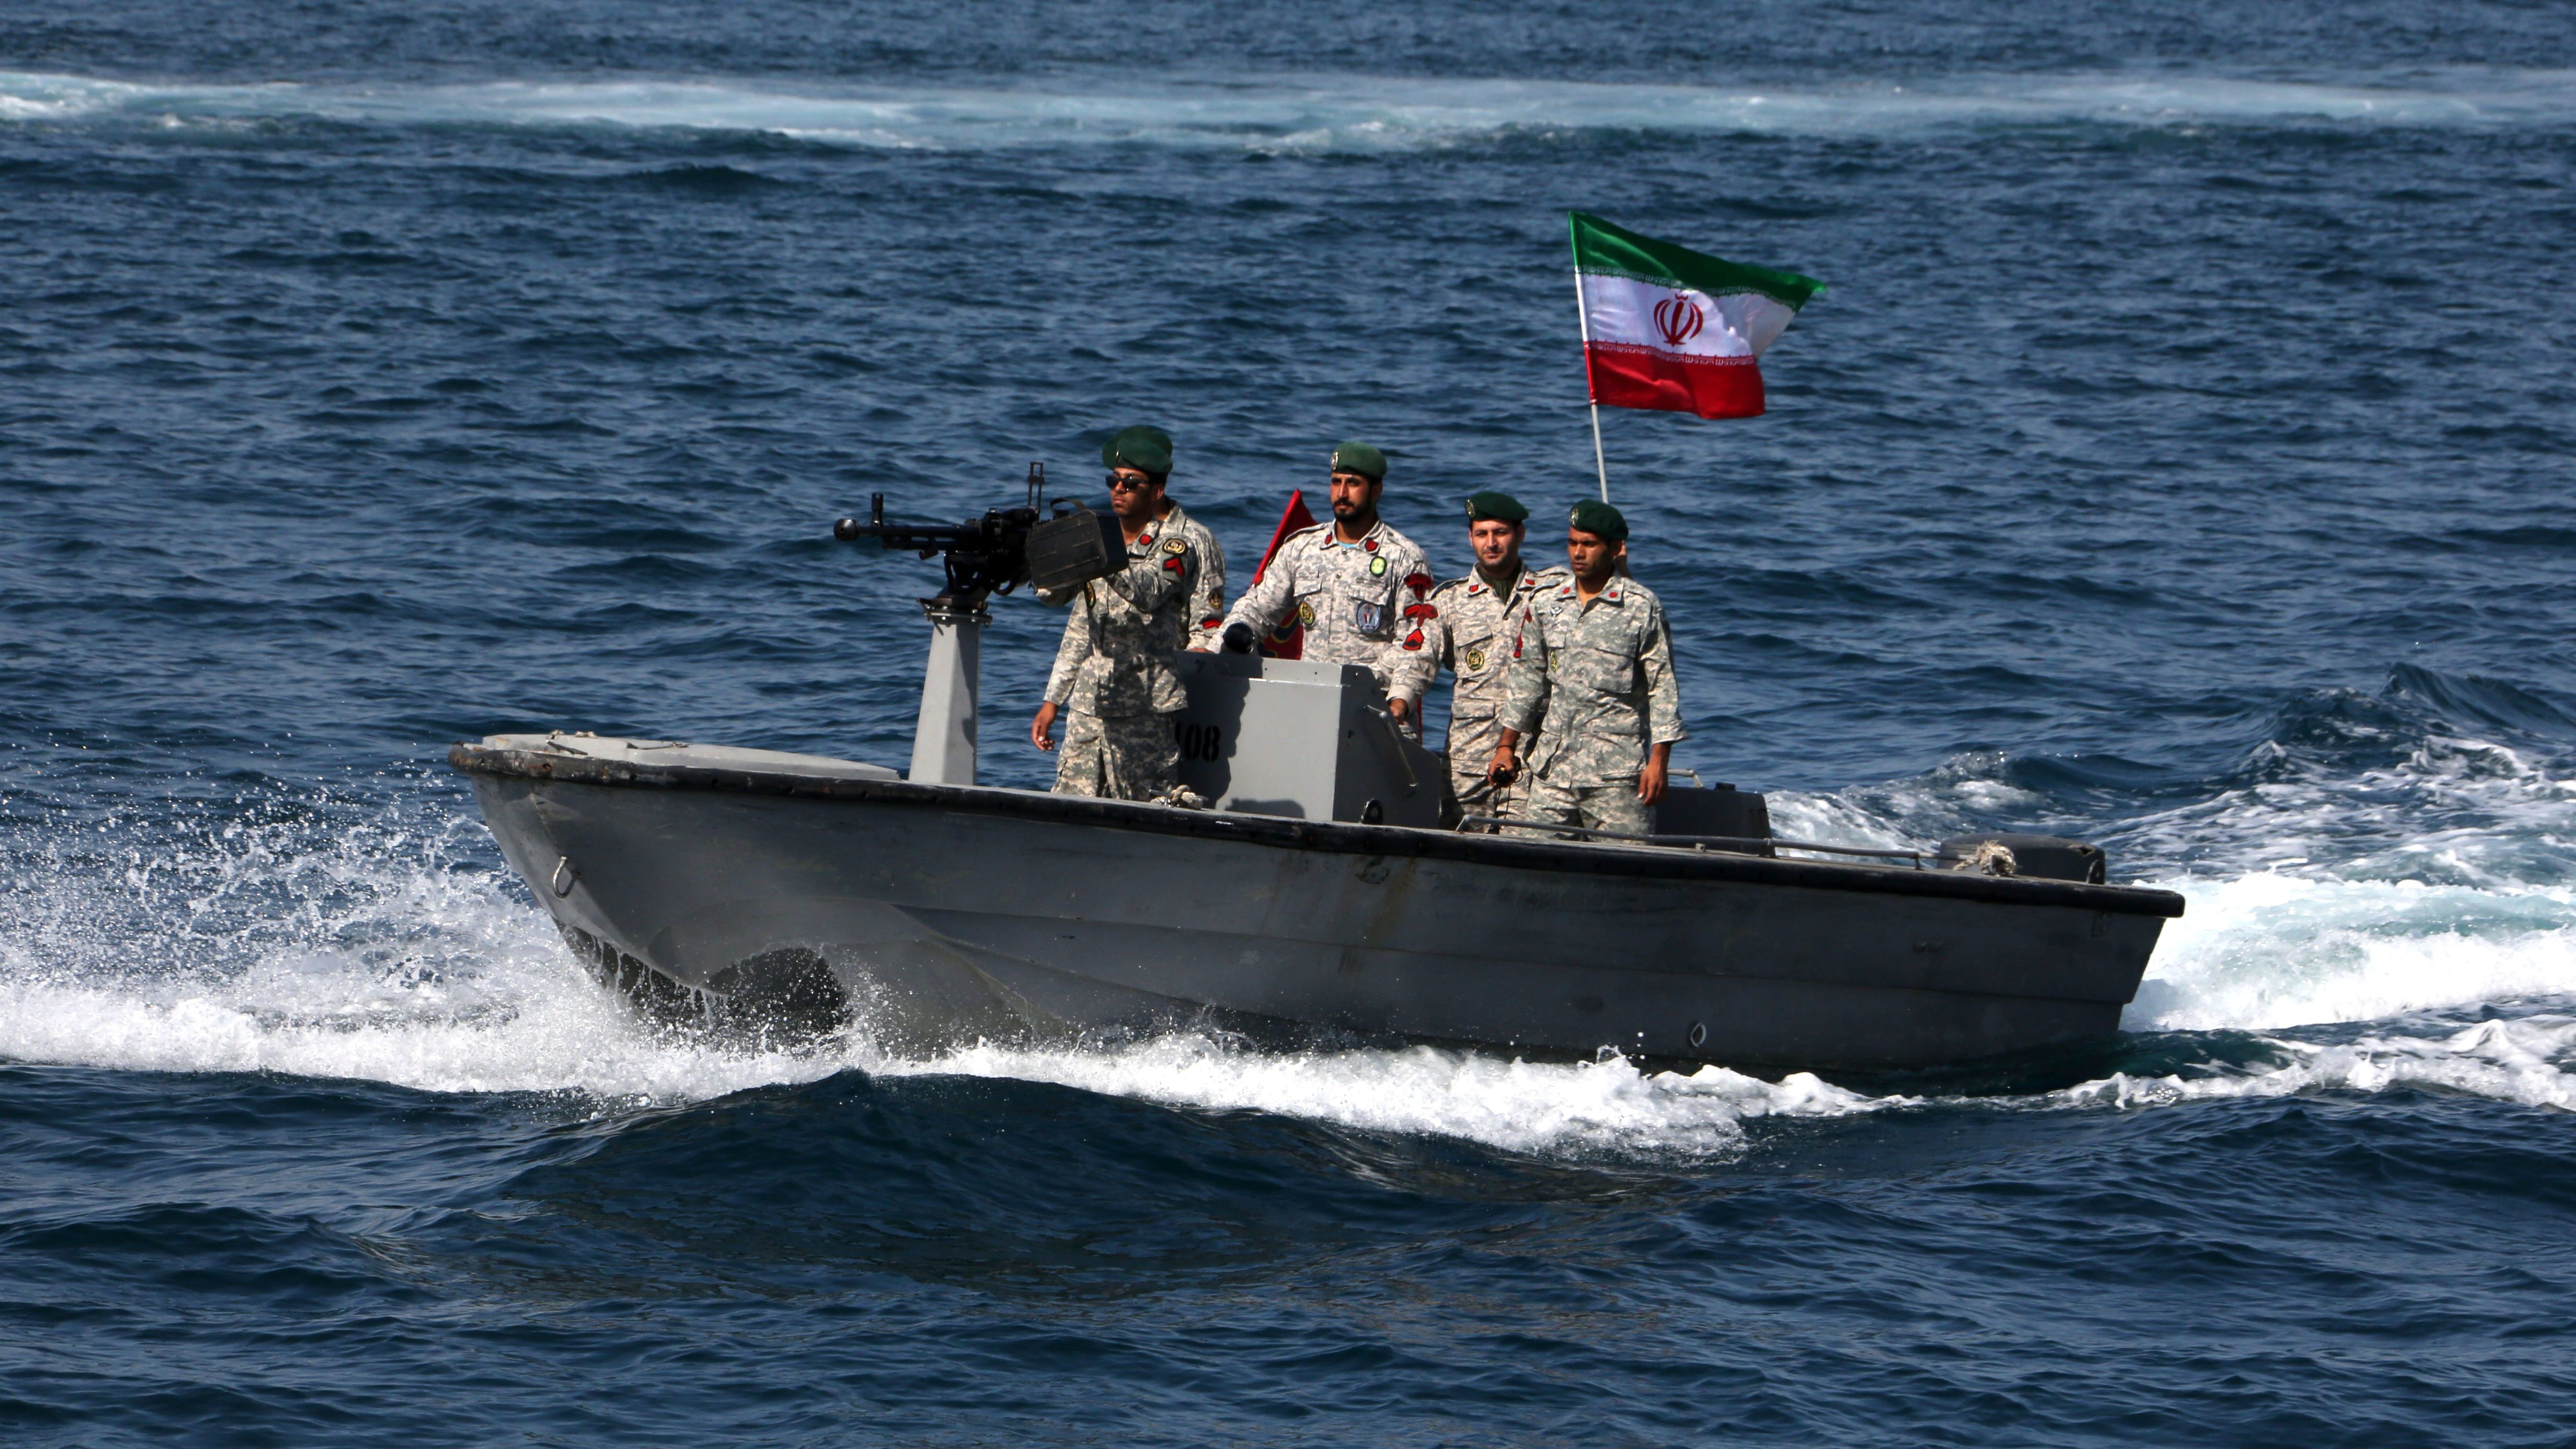 Head of Iranian Navy: We Watch All American Ships in Gulf